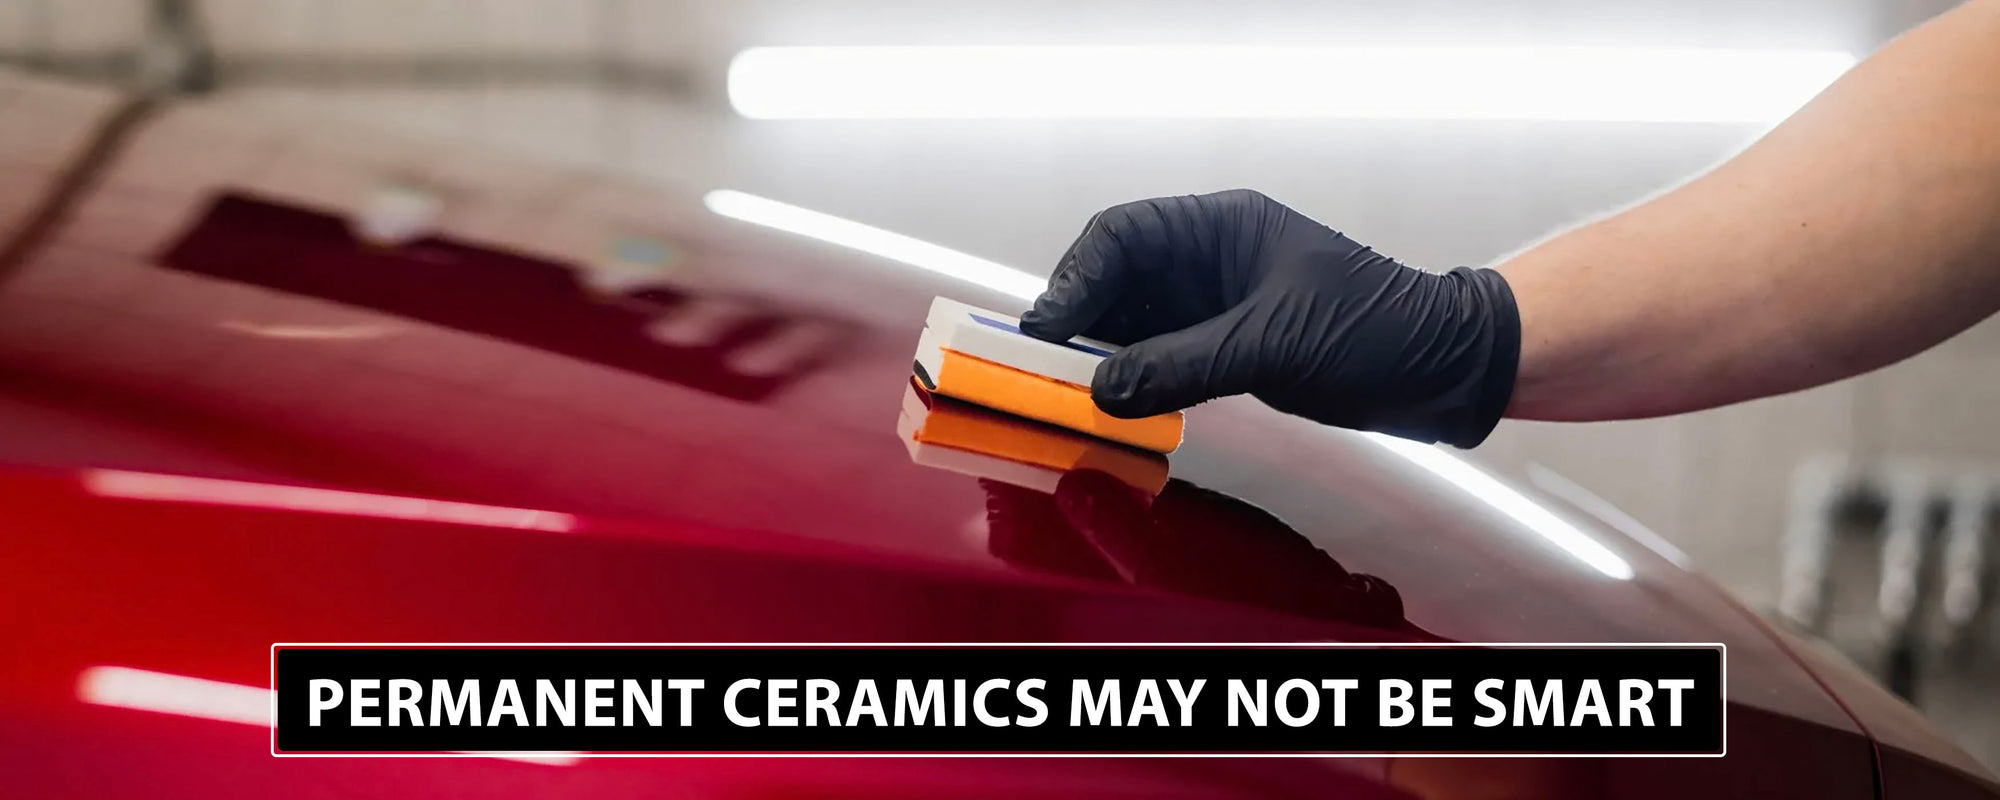 Why Applying Permanent Ceramics to Vehicles May Not Be the Smart Thing To Do